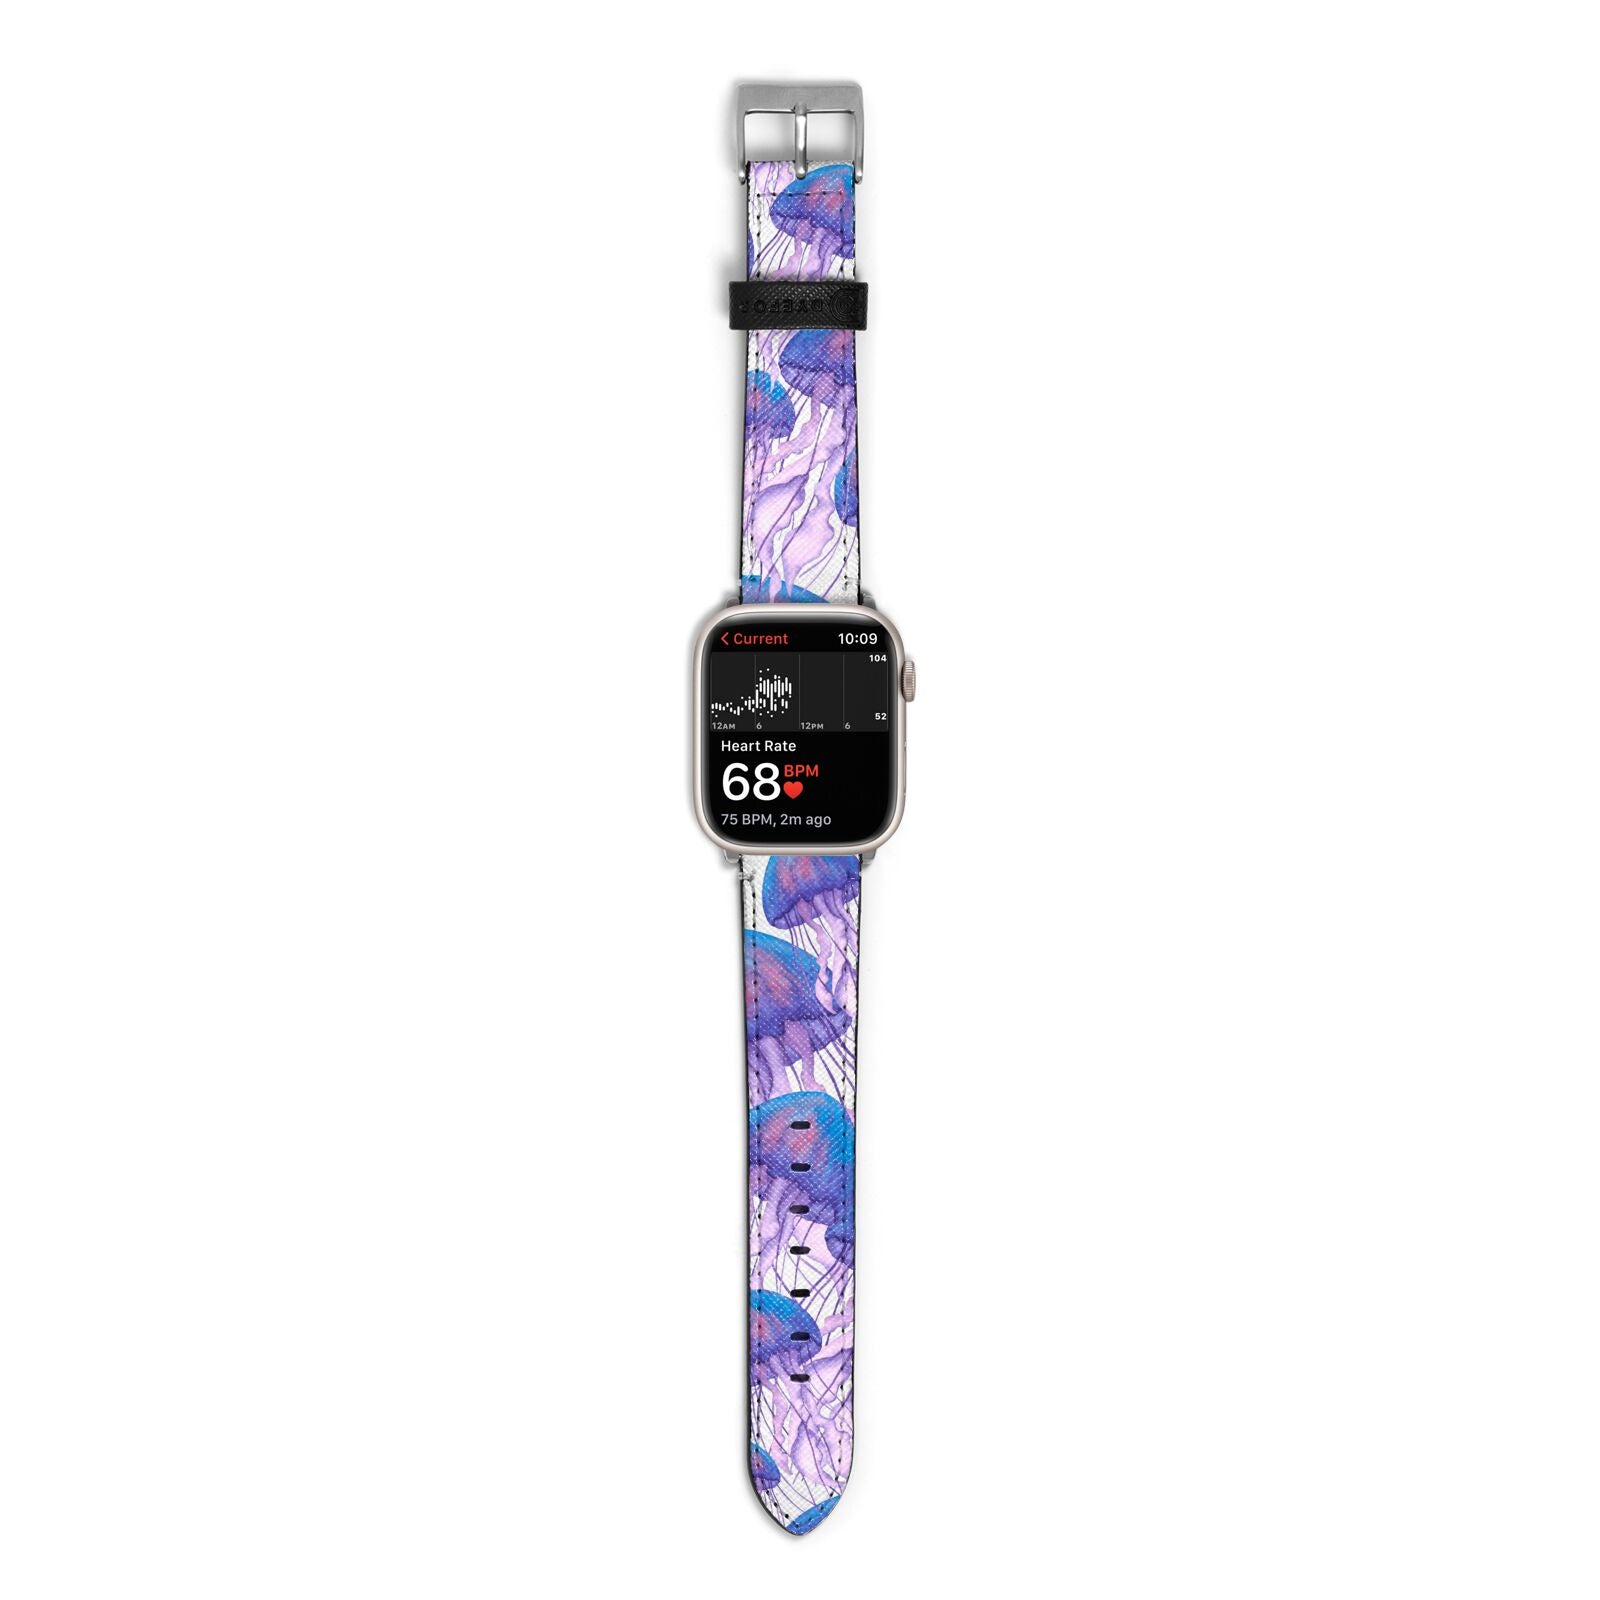 Jellyfish Apple Watch Strap Size 38mm with Silver Hardware